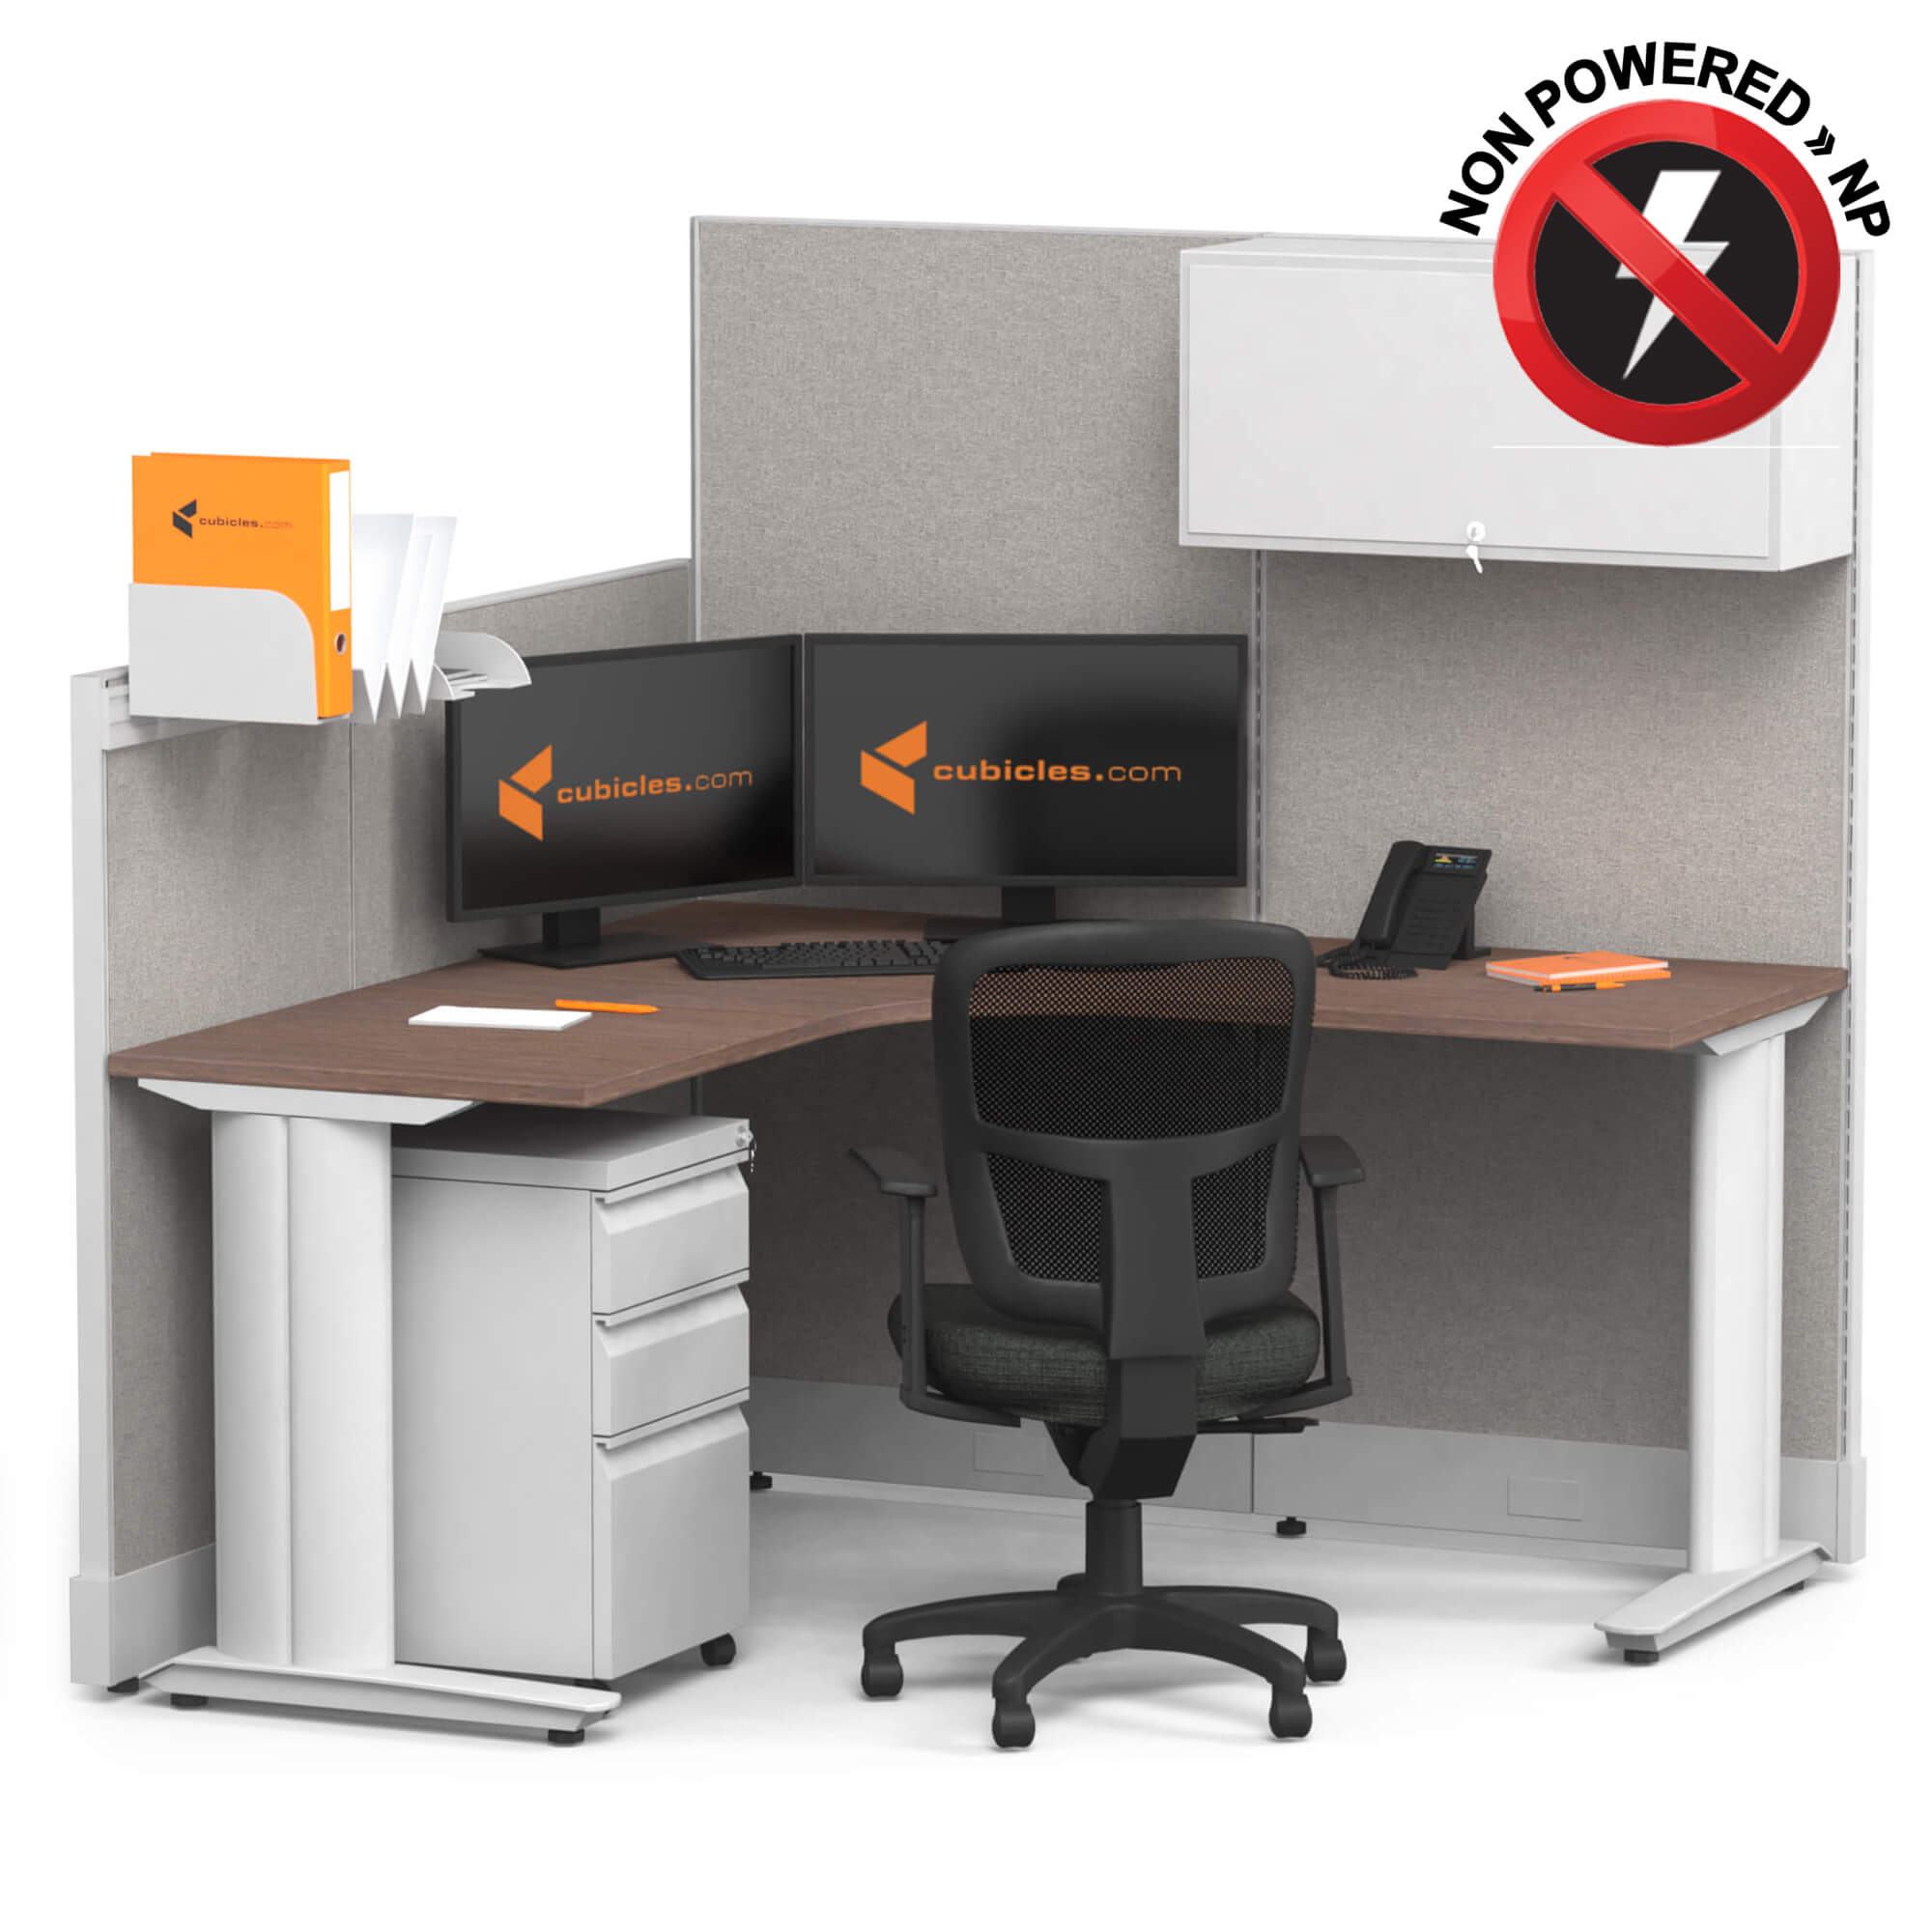 cubicle-desk-l-shaped-with-storage-1pack-non-powered-sign.jpg